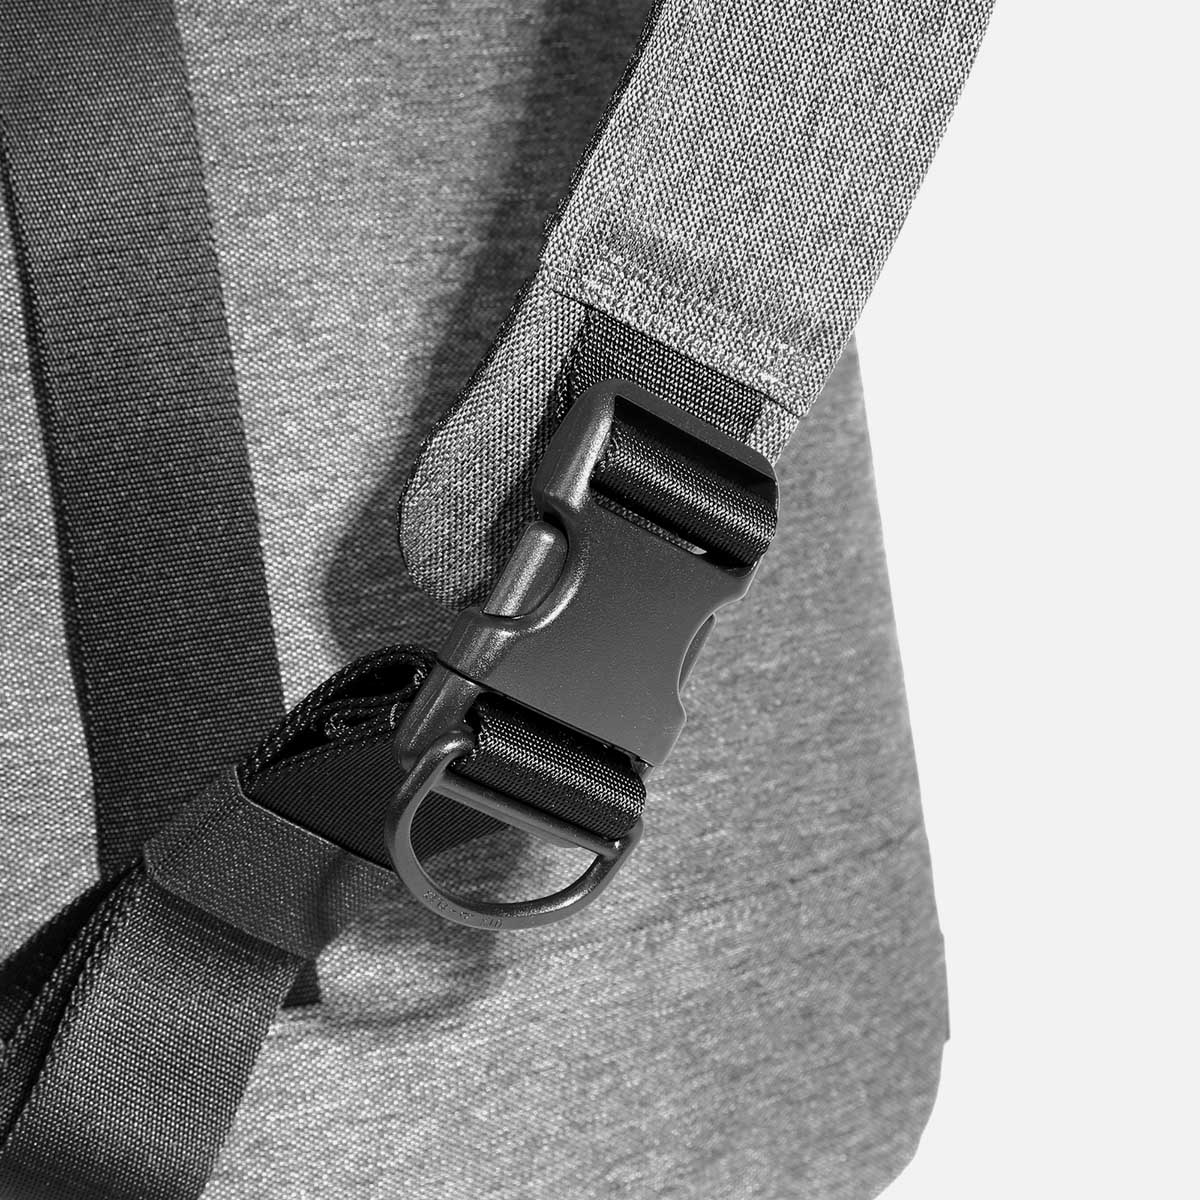 Travel Sling 2 Gray | Aer ｜ エアー公式通販サイト